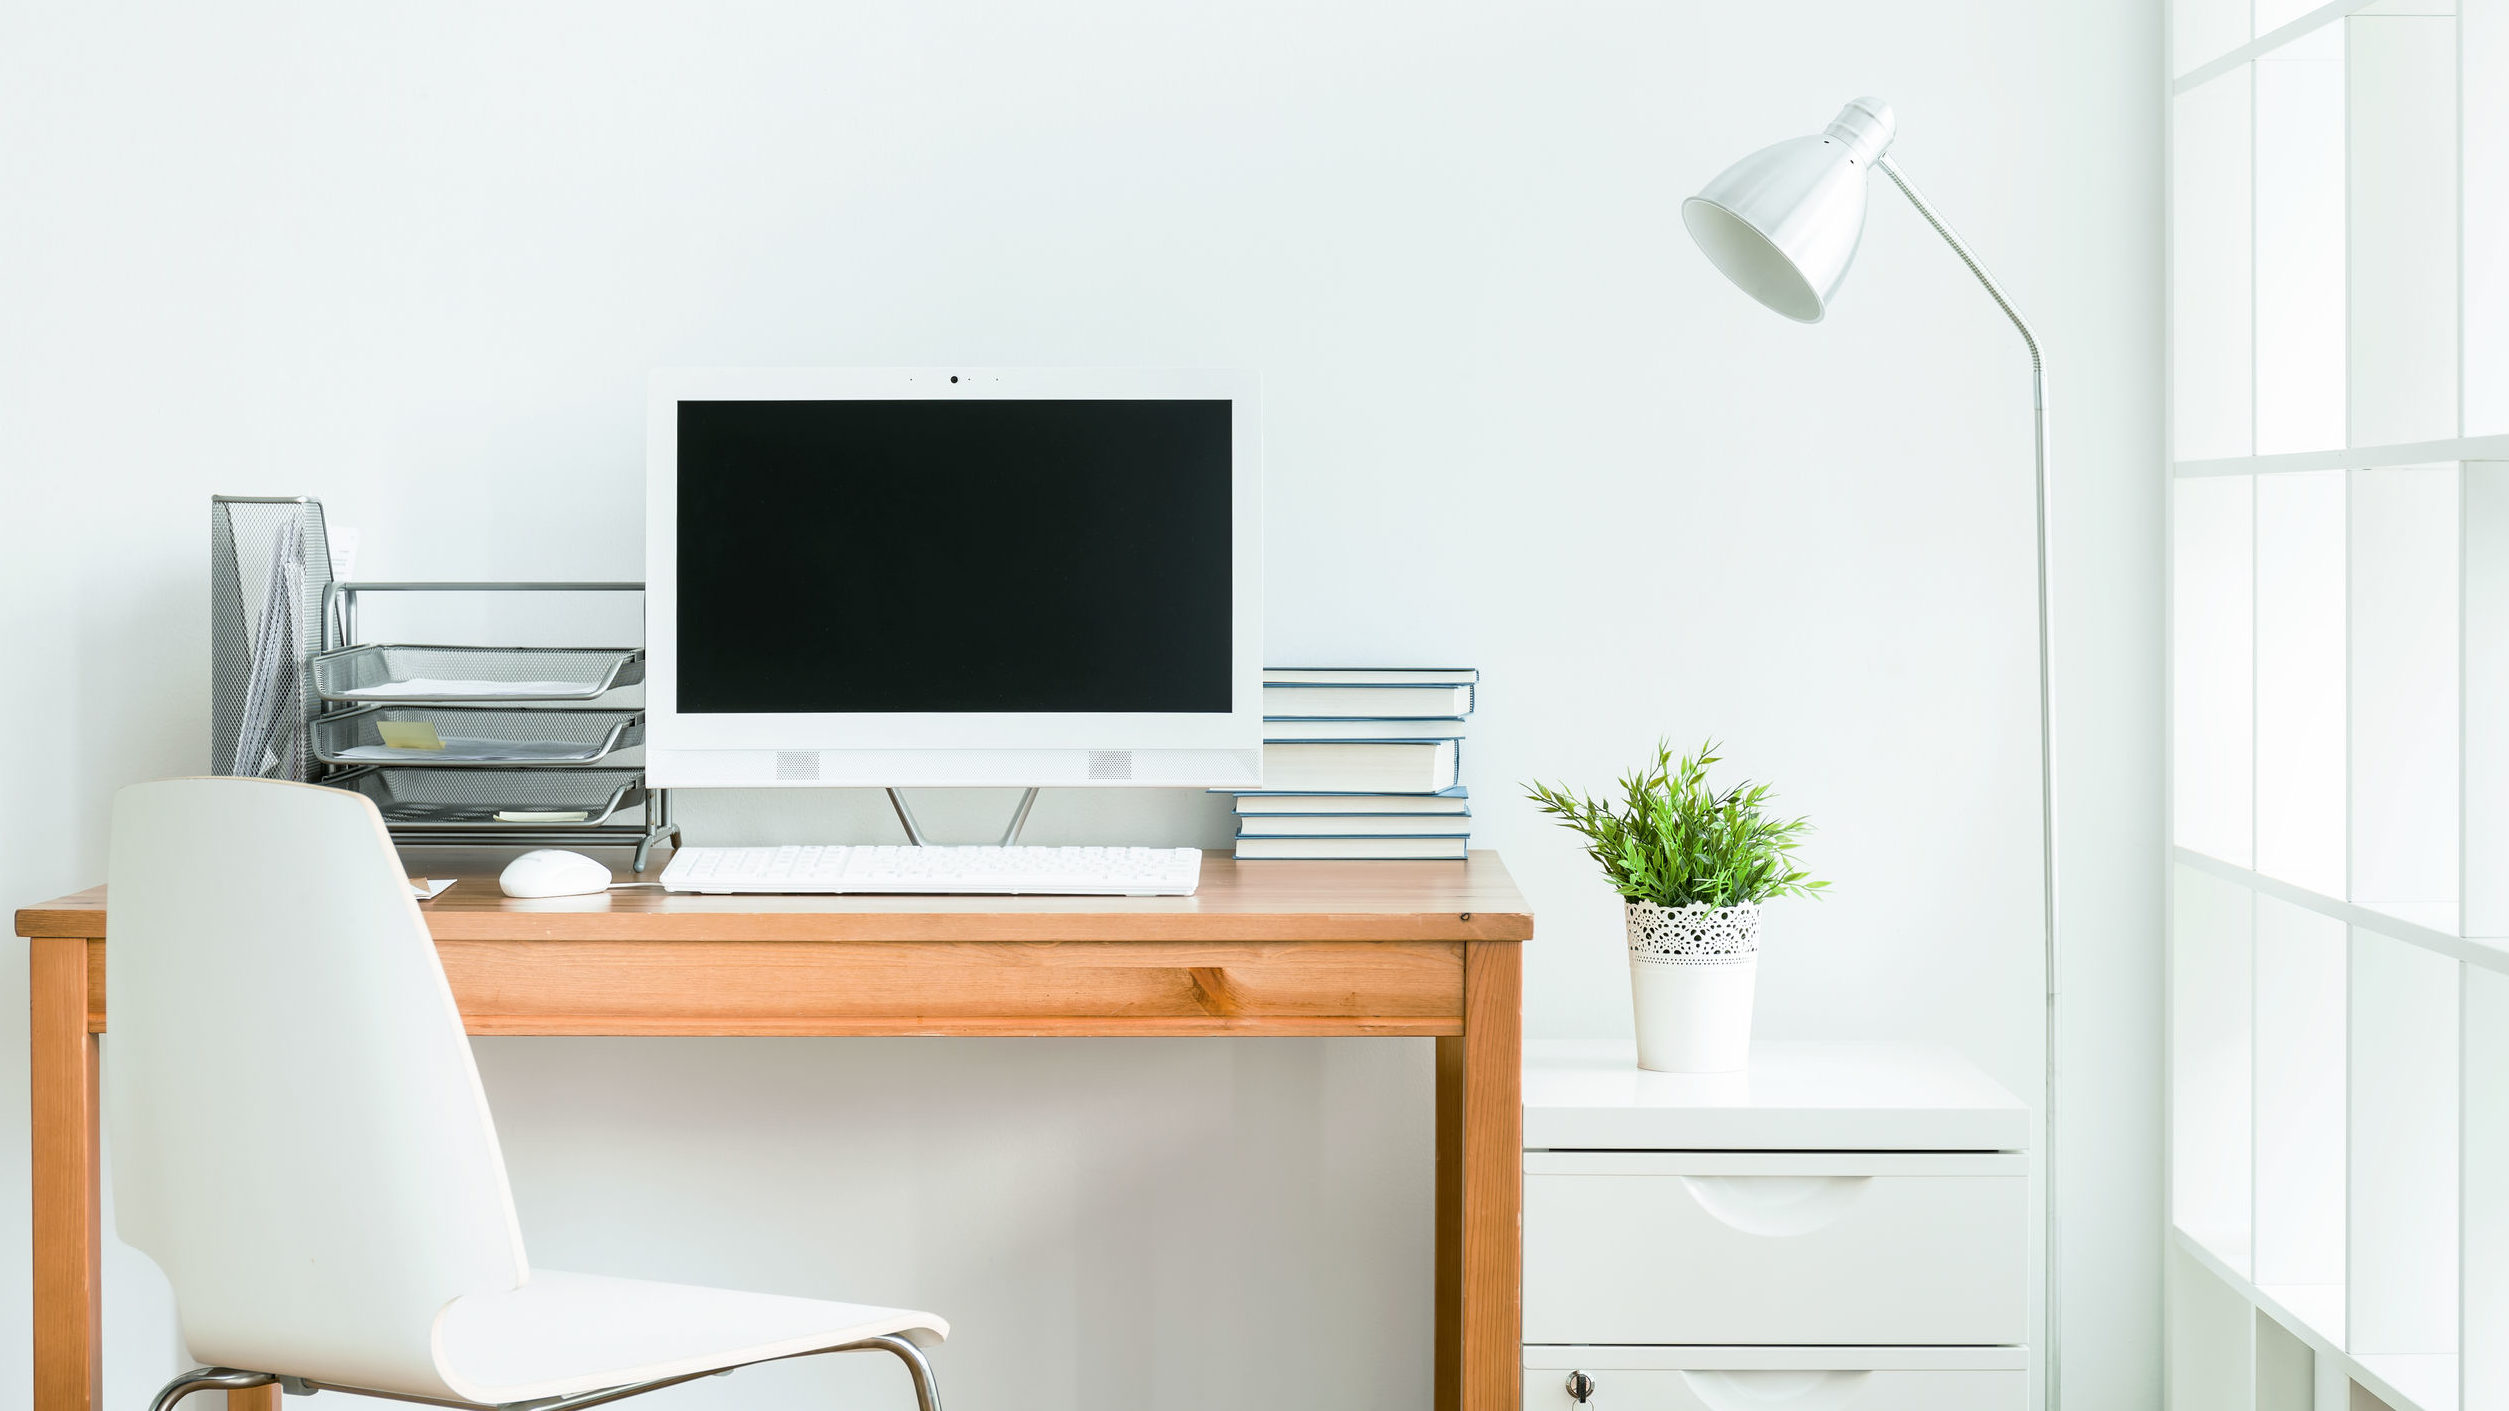 Working from Home: Mind Your Stress, Eat Healthy, Get Active and Stay Connected